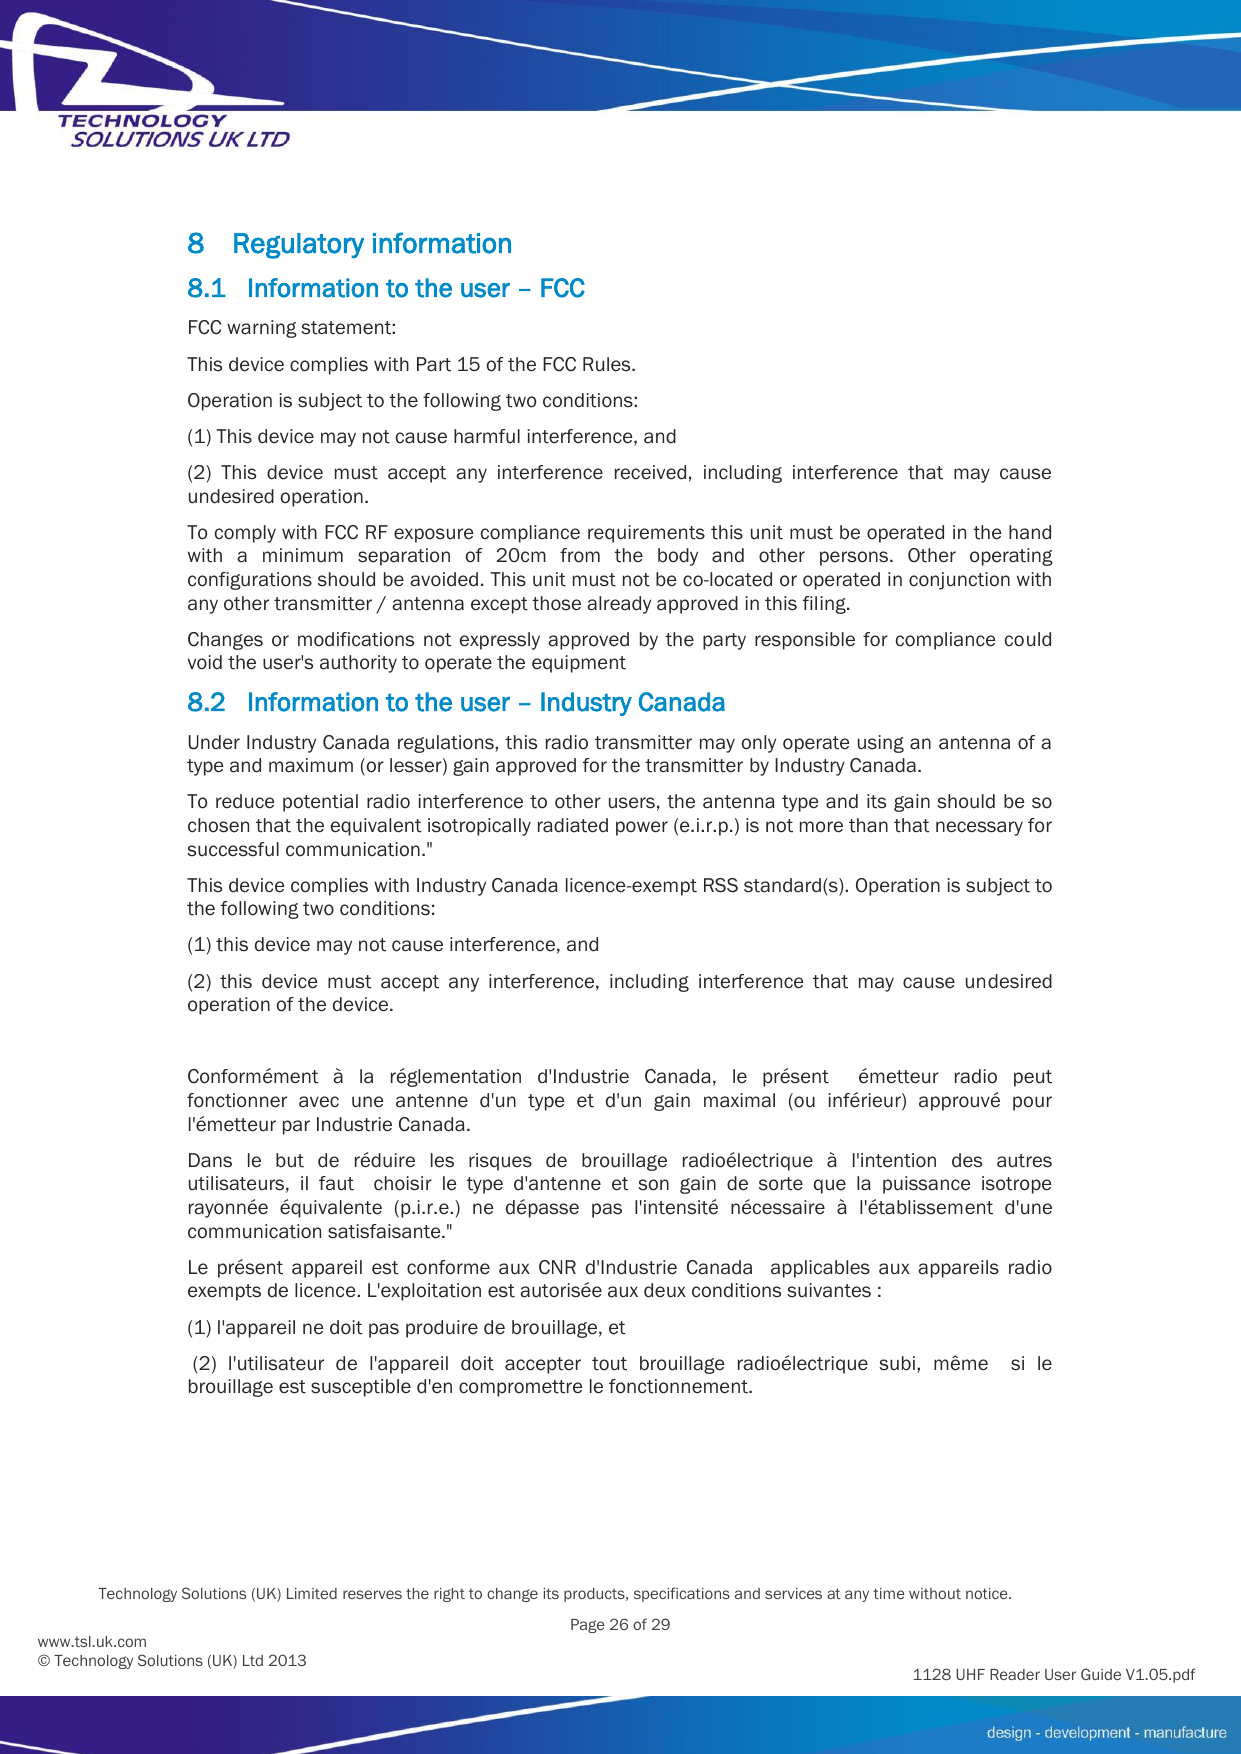          Technology Solutions (UK) Limited reserves the right to change its products, specifications and services at any time without notice.   Page 26 of 29 1128 UHF Reader User Guide V1.05.pdf www.tsl.uk.com © Technology Solutions (UK) Ltd 2013  8 Regulatory information 8.1 Information to the user – FCC FCC warning statement: This device complies with Part 15 of the FCC Rules.  Operation is subject to the following two conditions:  (1) This device may not cause harmful interference, and  (2)  This  device  must  accept  any  interference  received,  including  interference  that  may  cause undesired operation.  To comply with FCC RF exposure compliance requirements this unit must be operated in the hand with  a  minimum  separation  of  20cm  from  the  body  and  other  persons.  Other  operating configurations should be avoided. This unit must not be co-located or operated in conjunction with any other transmitter / antenna except those already approved in this filing. Changes  or  modifications  not  expressly  approved  by  the  party  responsible  for  compliance  could void the user&apos;s authority to operate the equipment 8.2 Information to the user – Industry Canada Under Industry Canada regulations, this radio transmitter may only operate using an antenna of a type and maximum (or lesser) gain approved for the transmitter by Industry Canada. To reduce potential radio interference to other users, the antenna type and its gain should be so chosen that the equivalent isotropically radiated power (e.i.r.p.) is not more than that necessary for successful communication.&quot; This device complies with Industry Canada licence-exempt RSS standard(s). Operation is subject to the following two conditions: (1) this device may not cause interference, and  (2)  this  device  must  accept  any  interference,  including  interference  that  may  cause  undesired operation of the device.  Conformément  à  la  réglementation  d&apos;Industrie  Canada,  le  présent    émetteur  radio  peut fonctionner  avec  une  antenne  d&apos;un  type  et  d&apos;un  gain  maximal  (ou  inférieur)  approuvé  pour l&apos;émetteur par Industrie Canada.  Dans  le  but  de  réduire  les  risques  de  brouillage  radioélectrique  à  l&apos;intention  des  autres utilisateurs,  il  faut    choisir  le  type  d&apos;antenne  et  son  gain  de  sorte  que  la  puissance  isotrope rayonnée  équivalente  (p.i.r.e.)  ne  dépasse  pas  l&apos;intensité  nécessaire  à  l&apos;établissement  d&apos;une communication satisfaisante.&quot; Le  présent  appareil  est  conforme  aux  CNR  d&apos;Industrie  Canada    applicables  aux  appareils  radio exempts de licence. L&apos;exploitation est autorisée aux deux conditions suivantes : (1) l&apos;appareil ne doit pas produire de brouillage, et   (2)  l&apos;utilisateur  de  l&apos;appareil  doit  accepter  tout  brouillage  radioélectrique  subi,  même    si  le brouillage est susceptible d&apos;en compromettre le fonctionnement.   